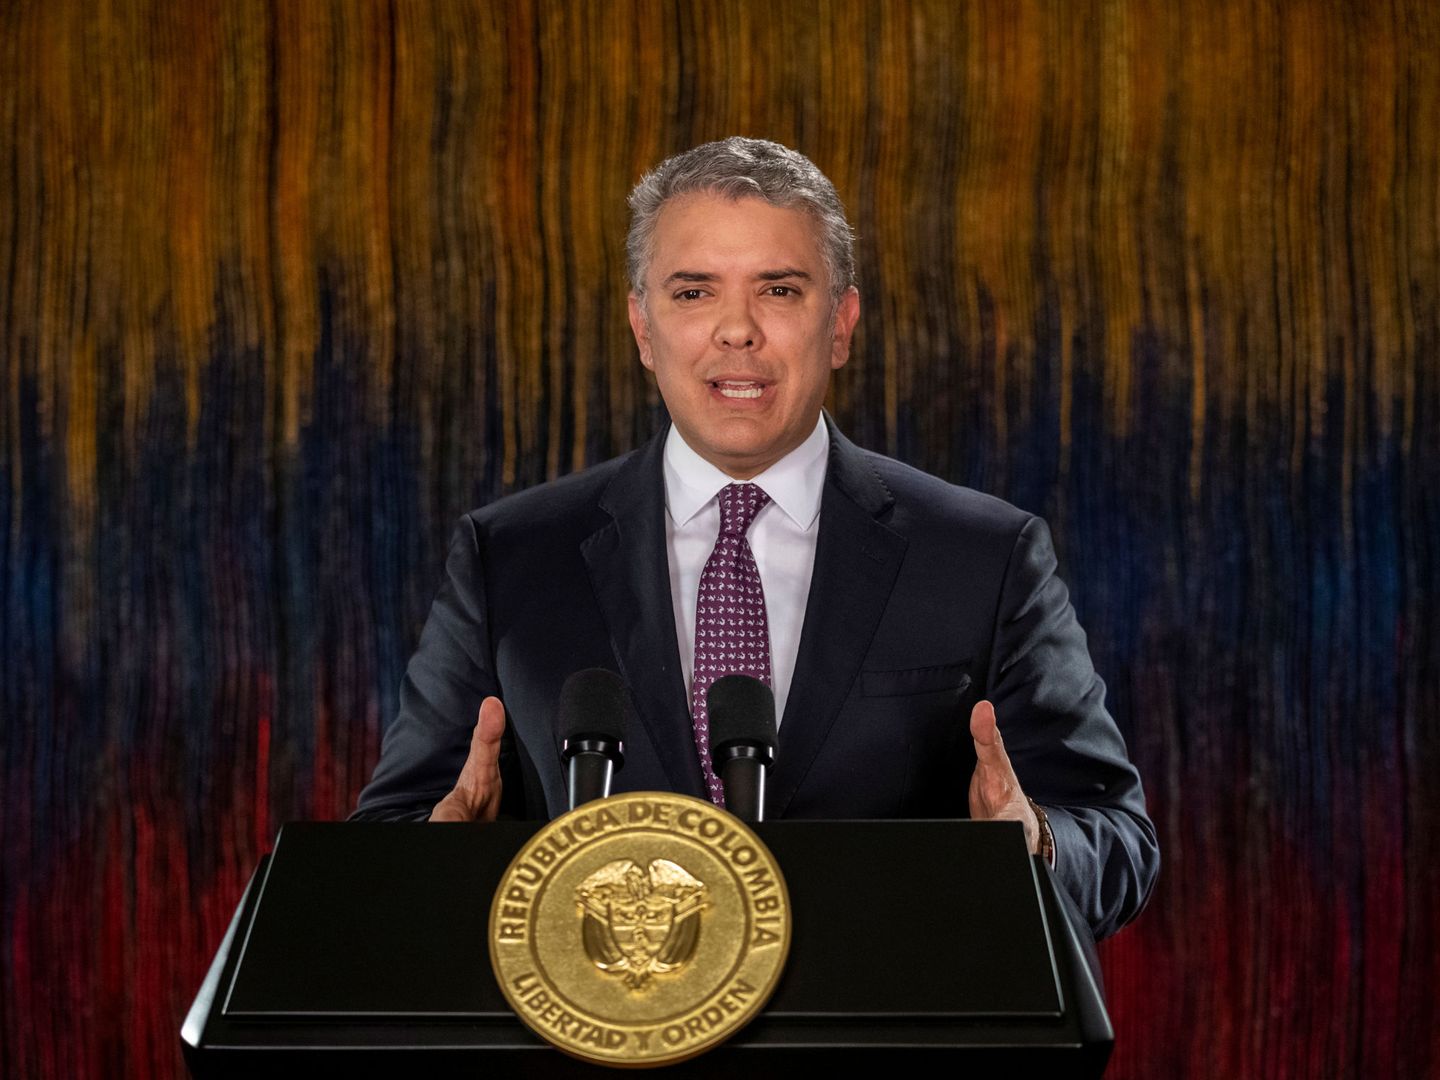 Colombia's President Ivan Duque addresses the nation in a televised speech, in Bogota, Colombia November 22, 2019. Picture taken November 22, 2019. Nicolas Galeano Colombian Presidency Handout via REUTERS ATTENTION EDITORS - THIS IMAGE WAS PROVIDED BY A THIRD PARTY